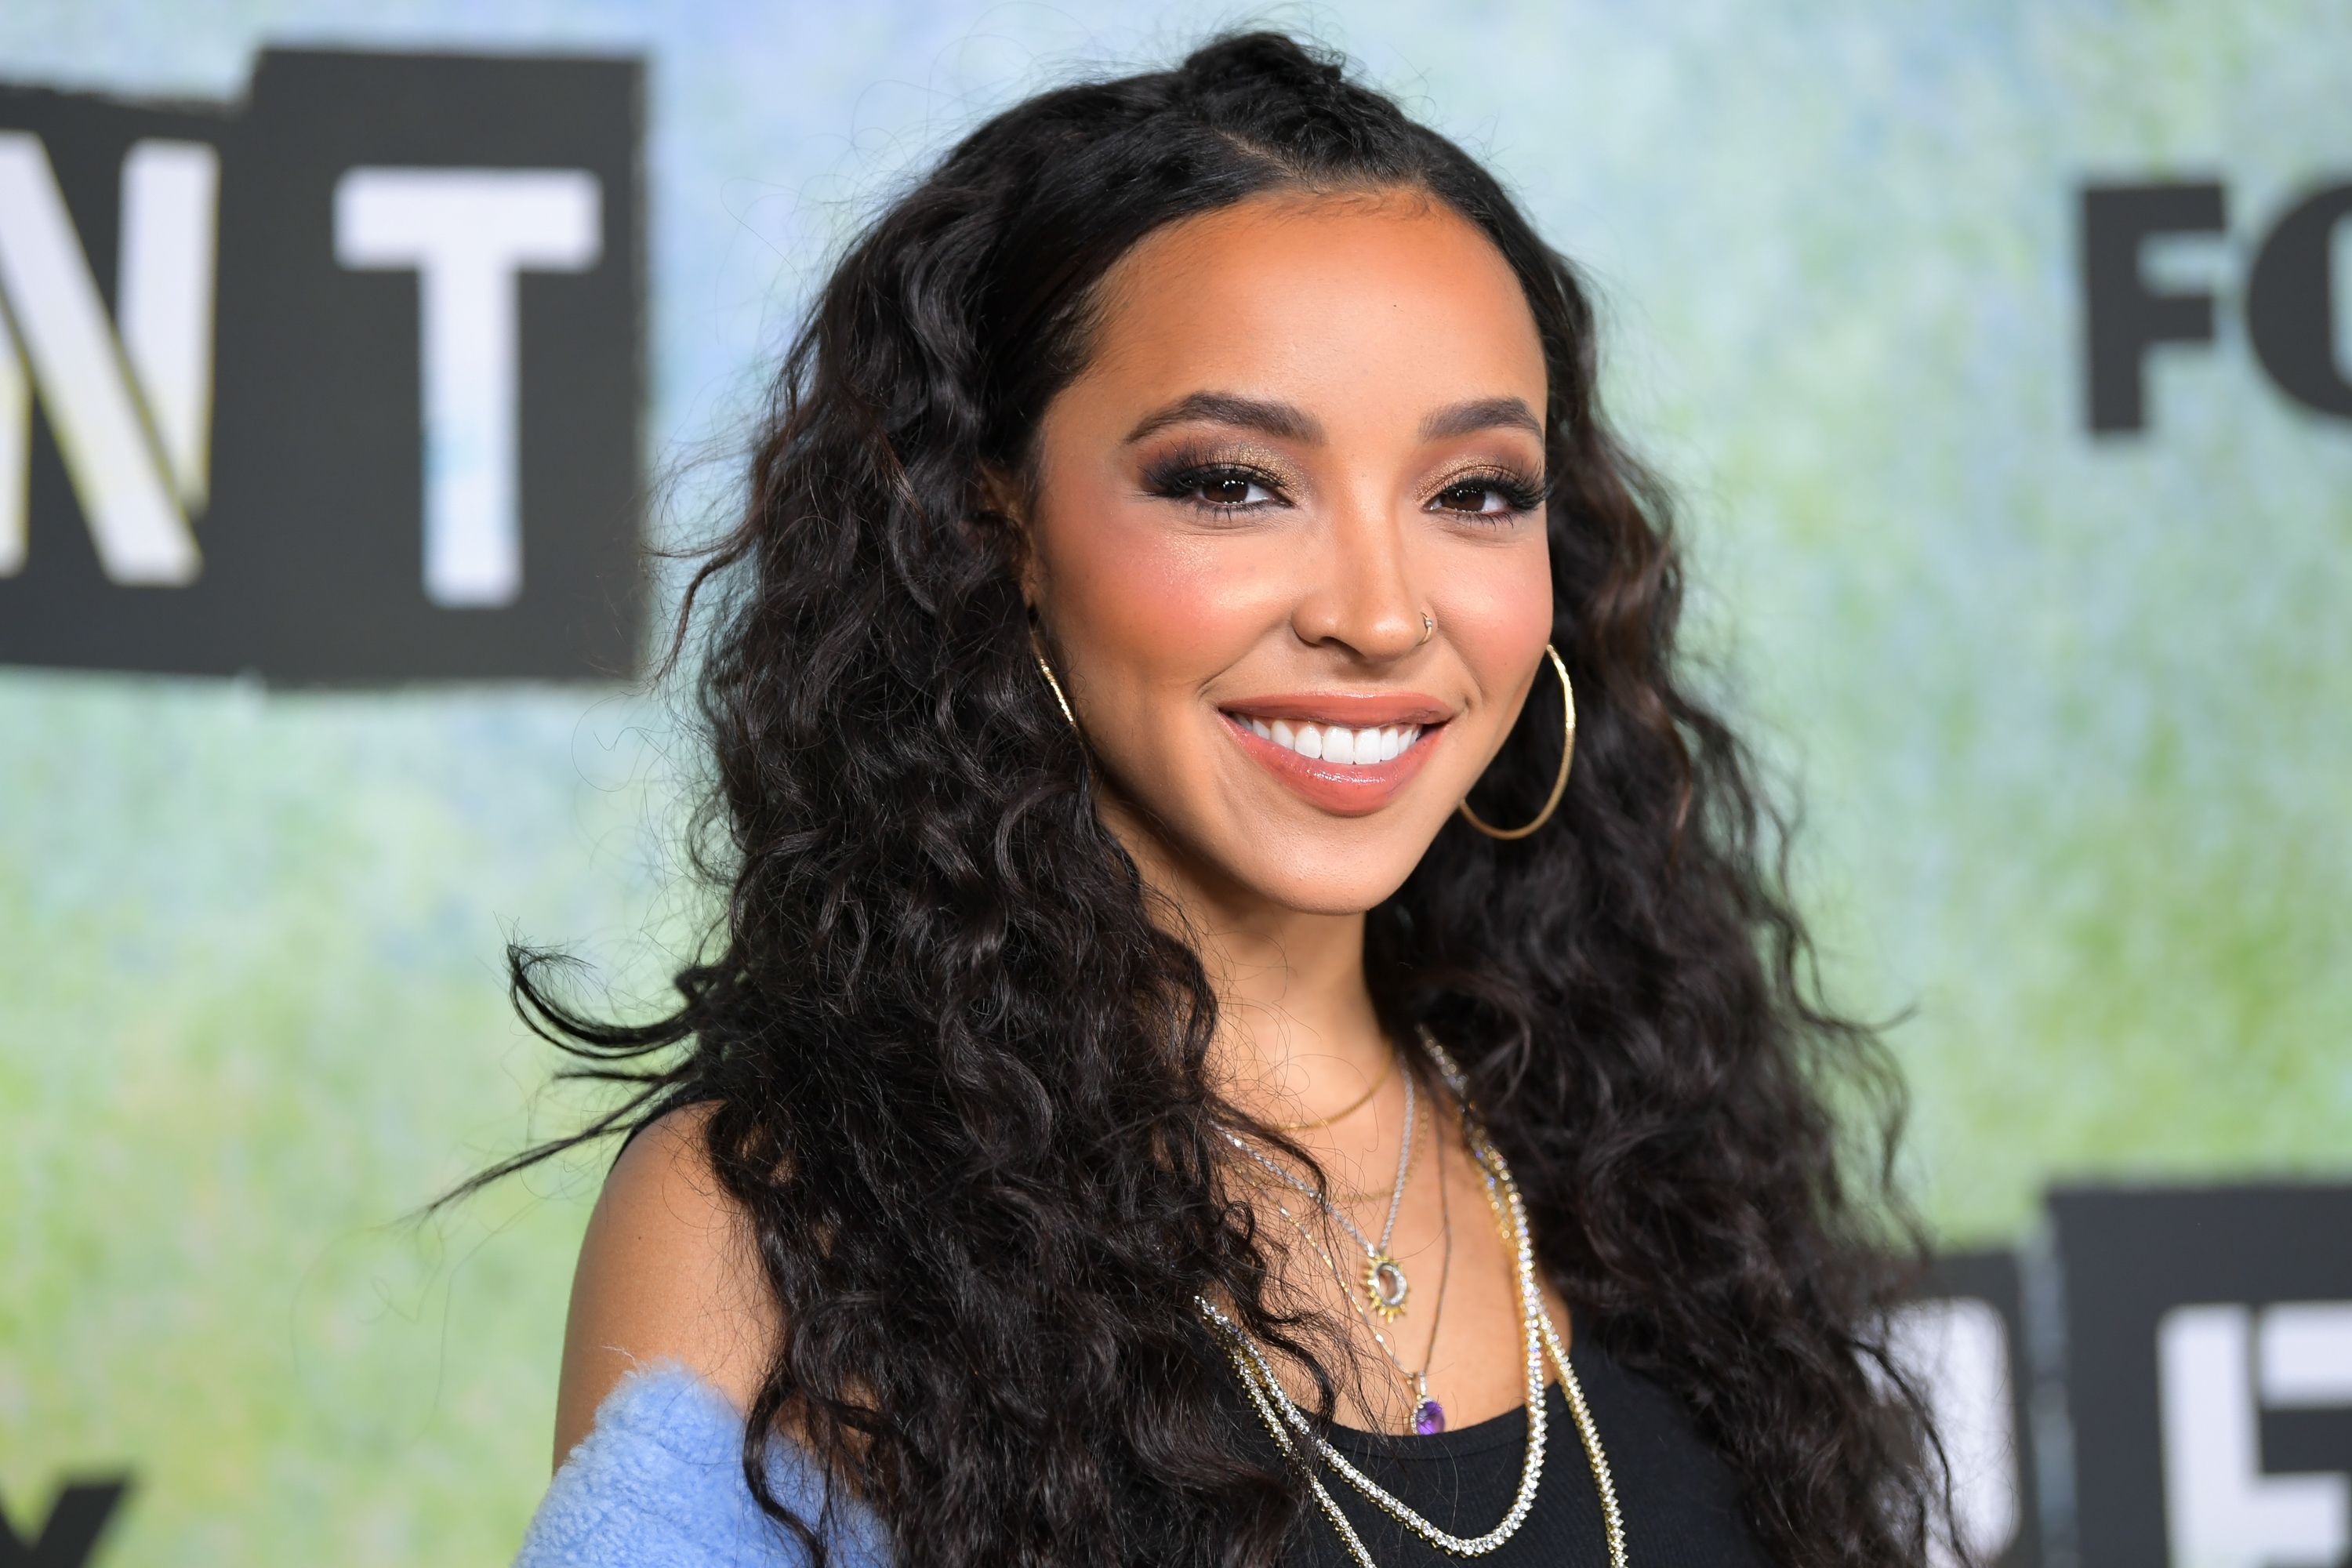 Tinashe attends the press junket for 'RENT' at Fox Studio Lot.